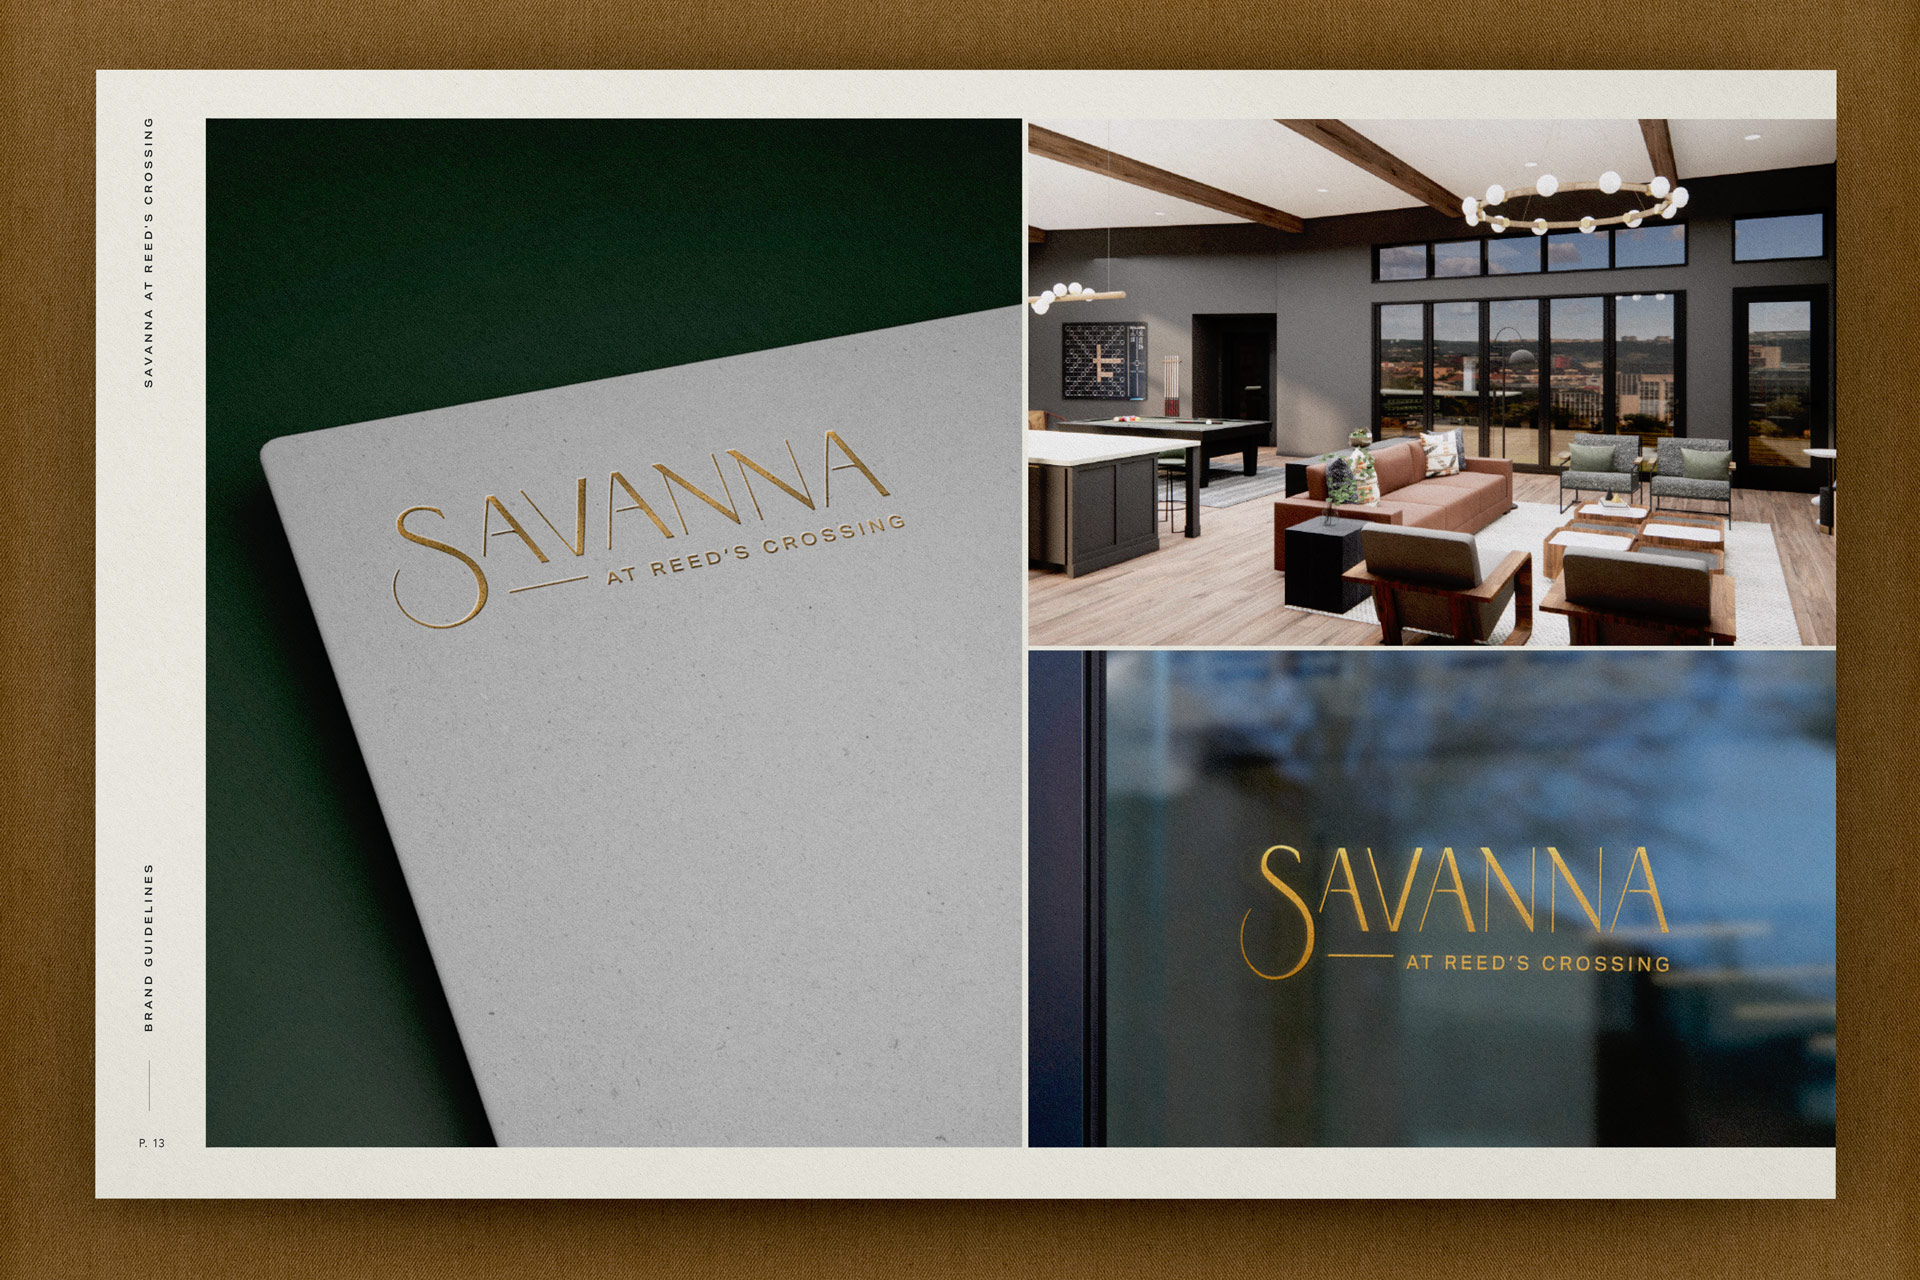 Savanna at Reed's Crossing mockup of branded window and folder created by incubate design